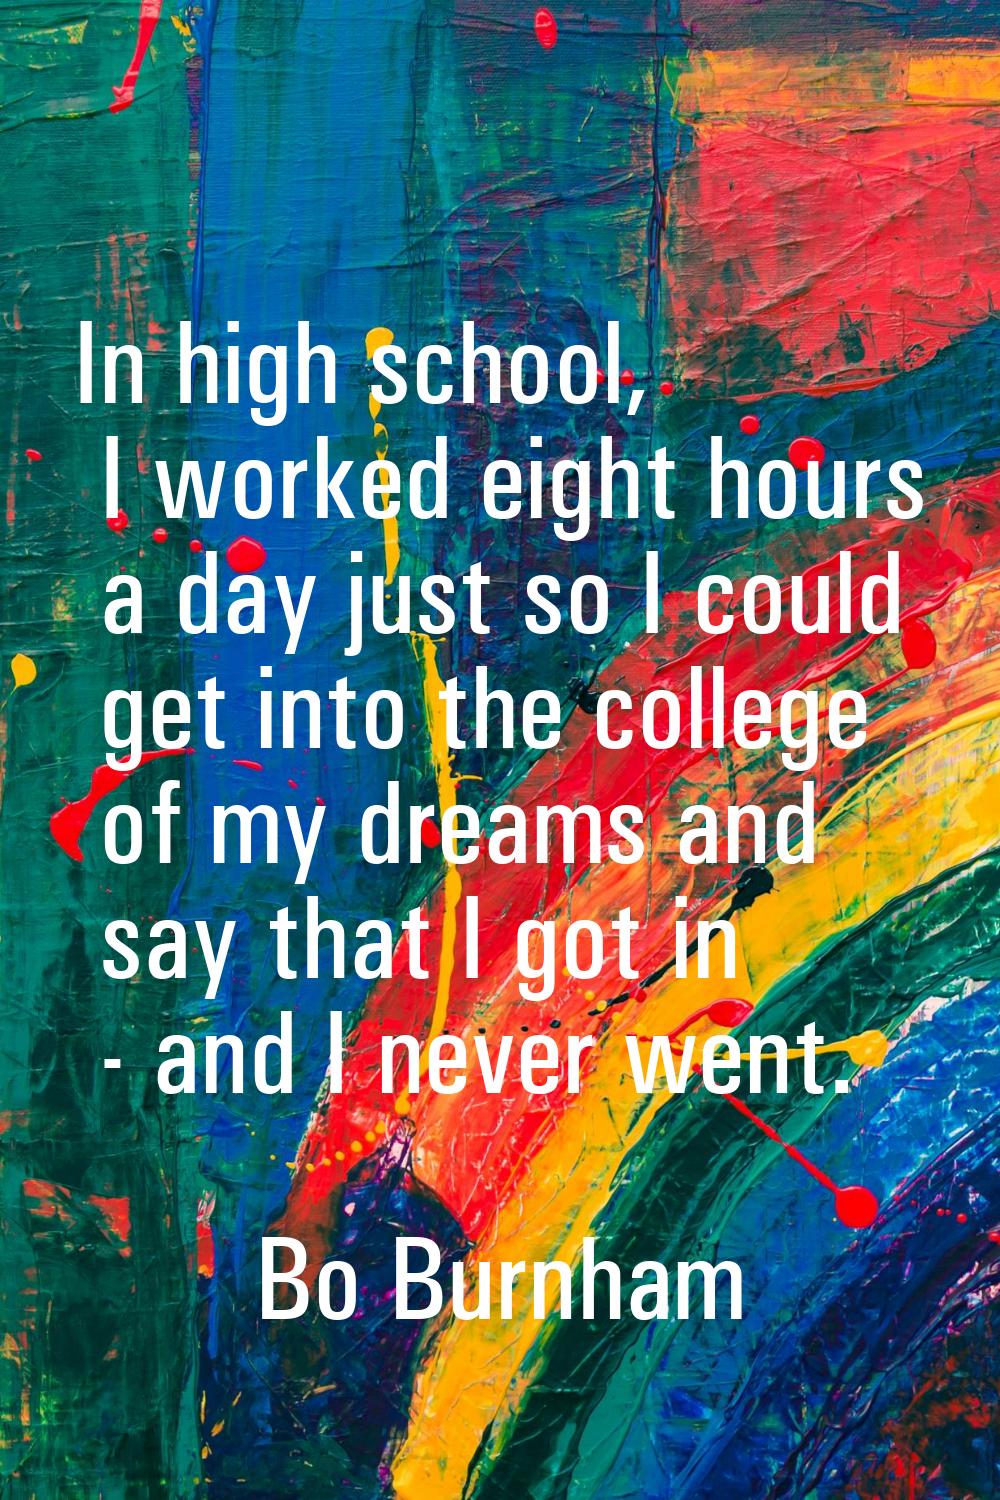 In high school, I worked eight hours a day just so I could get into the college of my dreams and sa